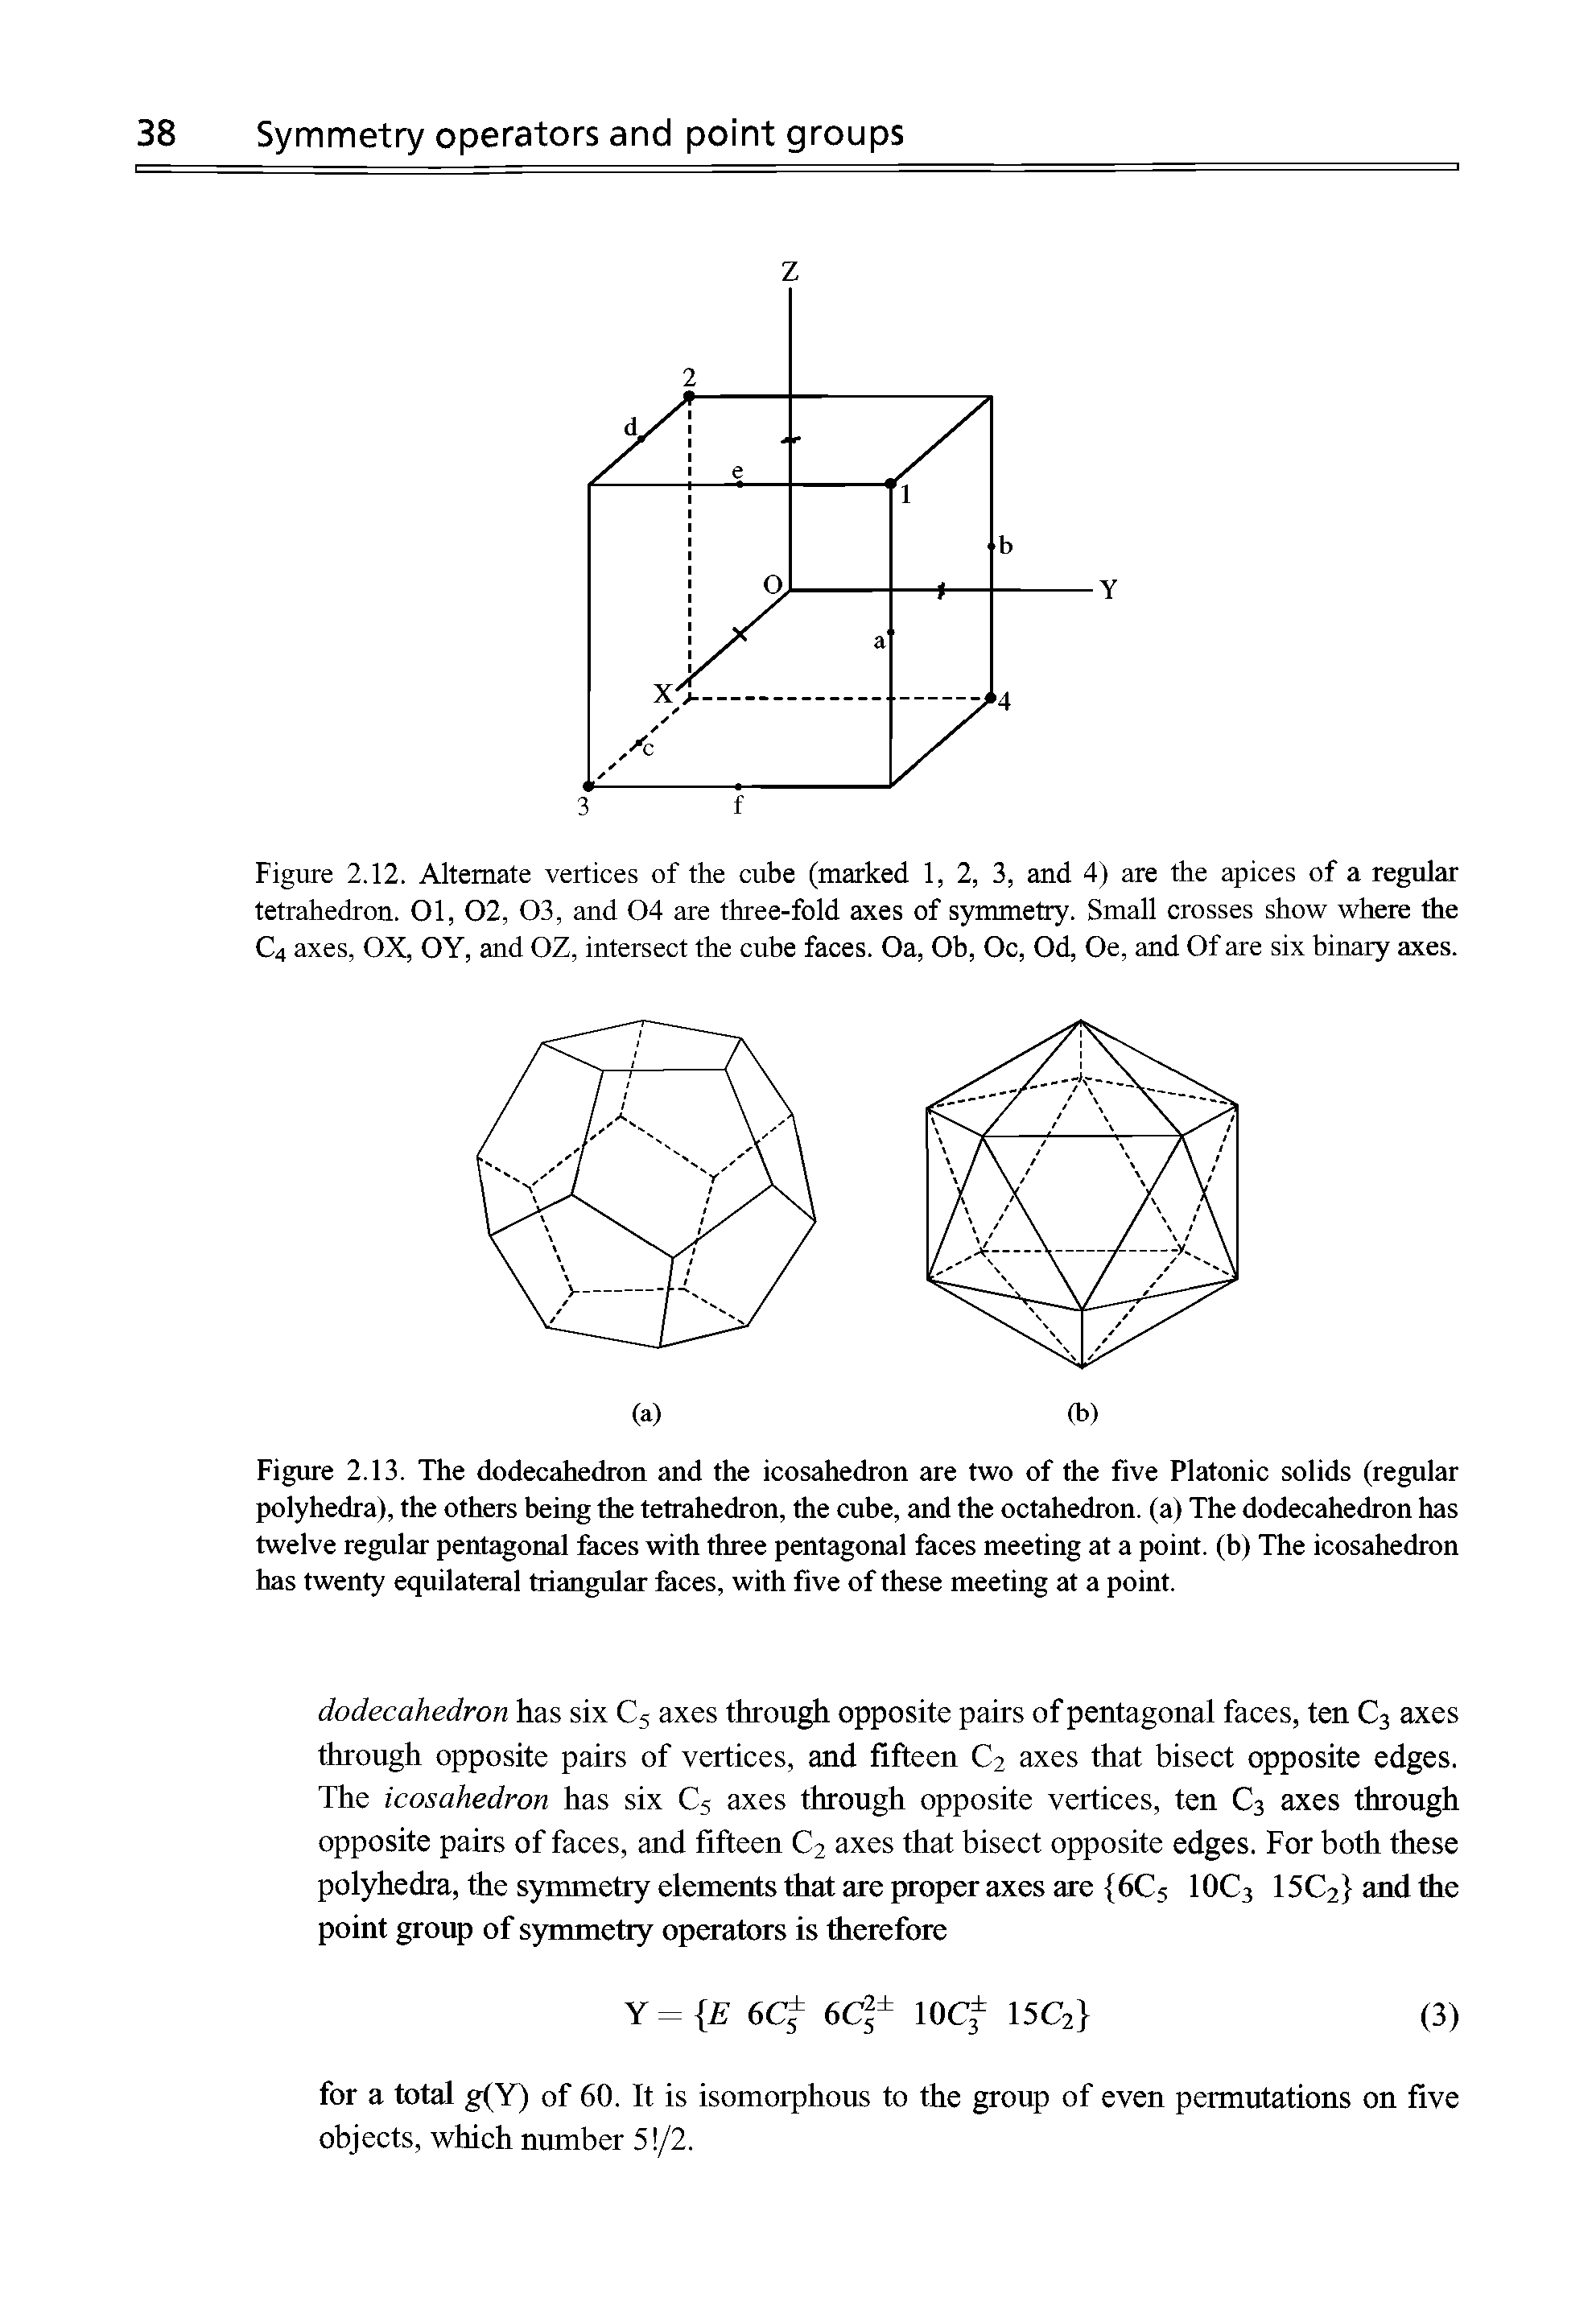 Figure 2.13. The dodecahedron and the icosahedron are two of the five Platonic solids (regular polyhedra), the others being the tetrahedron, the cube, and the octahedron, (a) The dodecahedron has twelve regular pentagonal faces with three pentagonal faces meeting at a point, (b) The icosahedron has twenty equilateral triangular faces, with five of these meeting at a point.